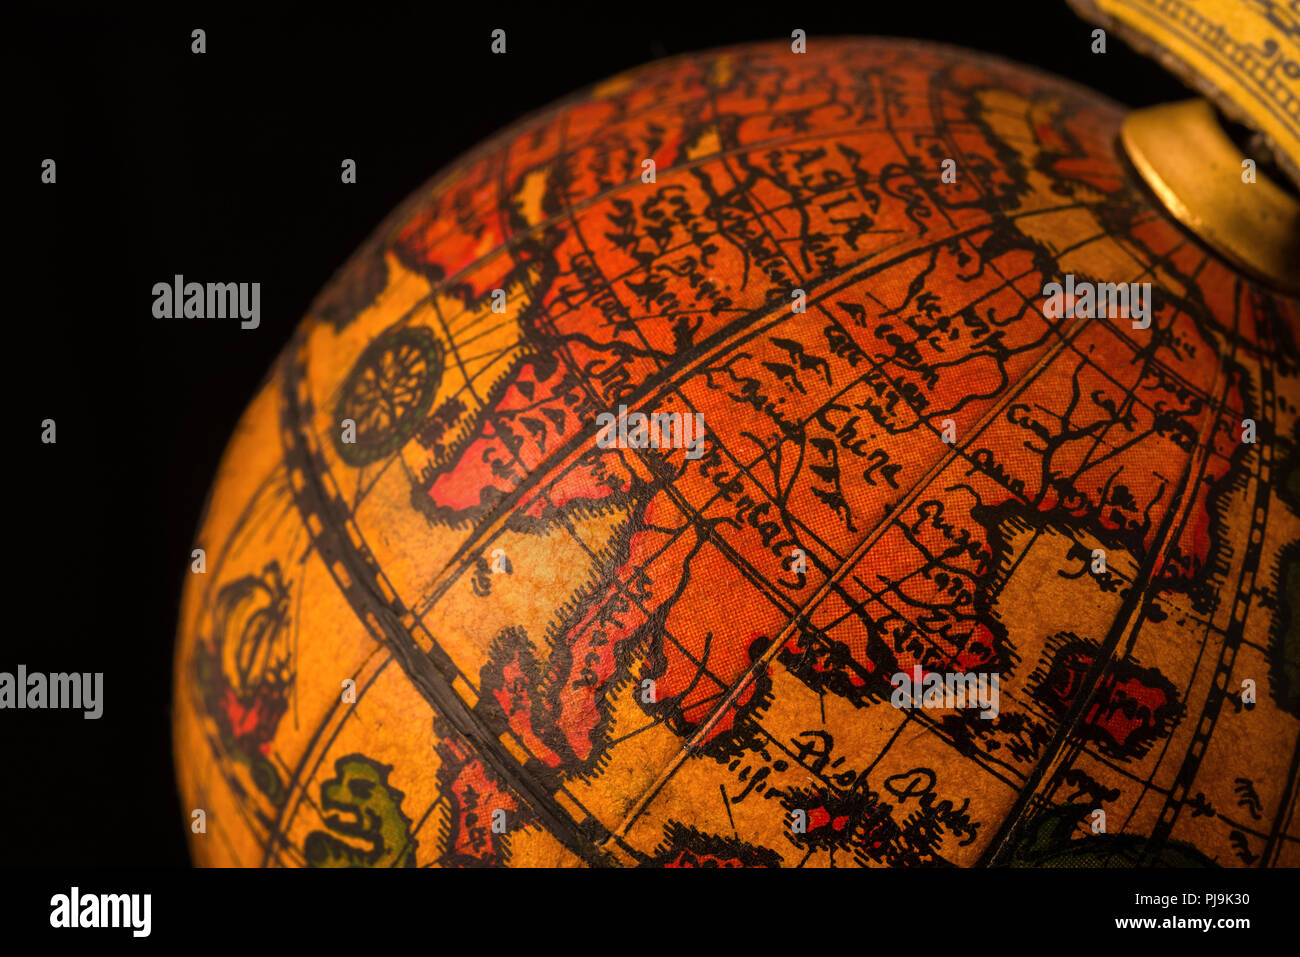 Ancient globe replica with map of East Asia countries on Eastern Hemisphere during the Age of Discovery Stock Photo